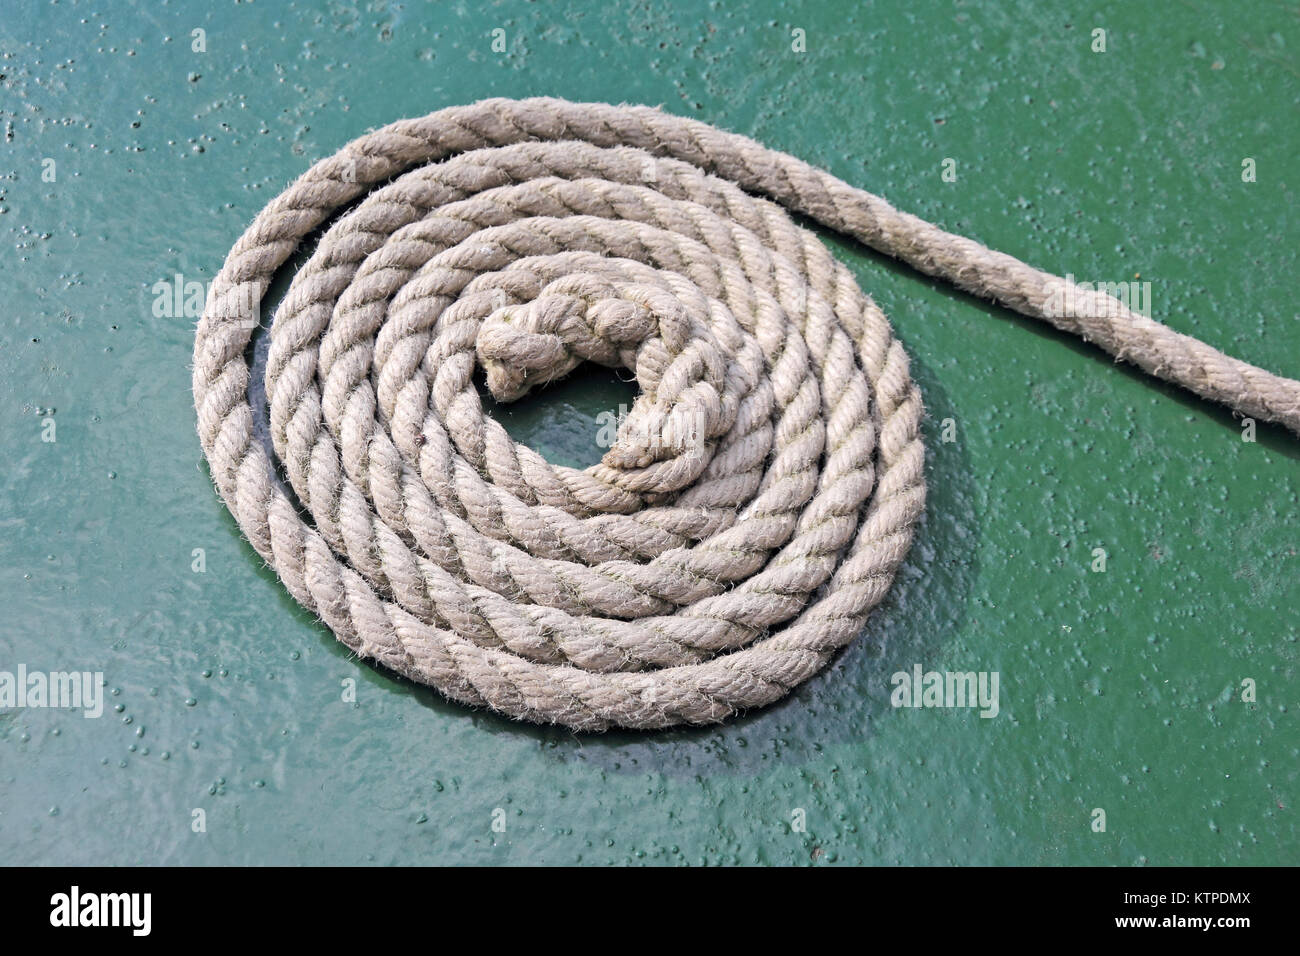 Rope neatly coiled on boat Stock Photo